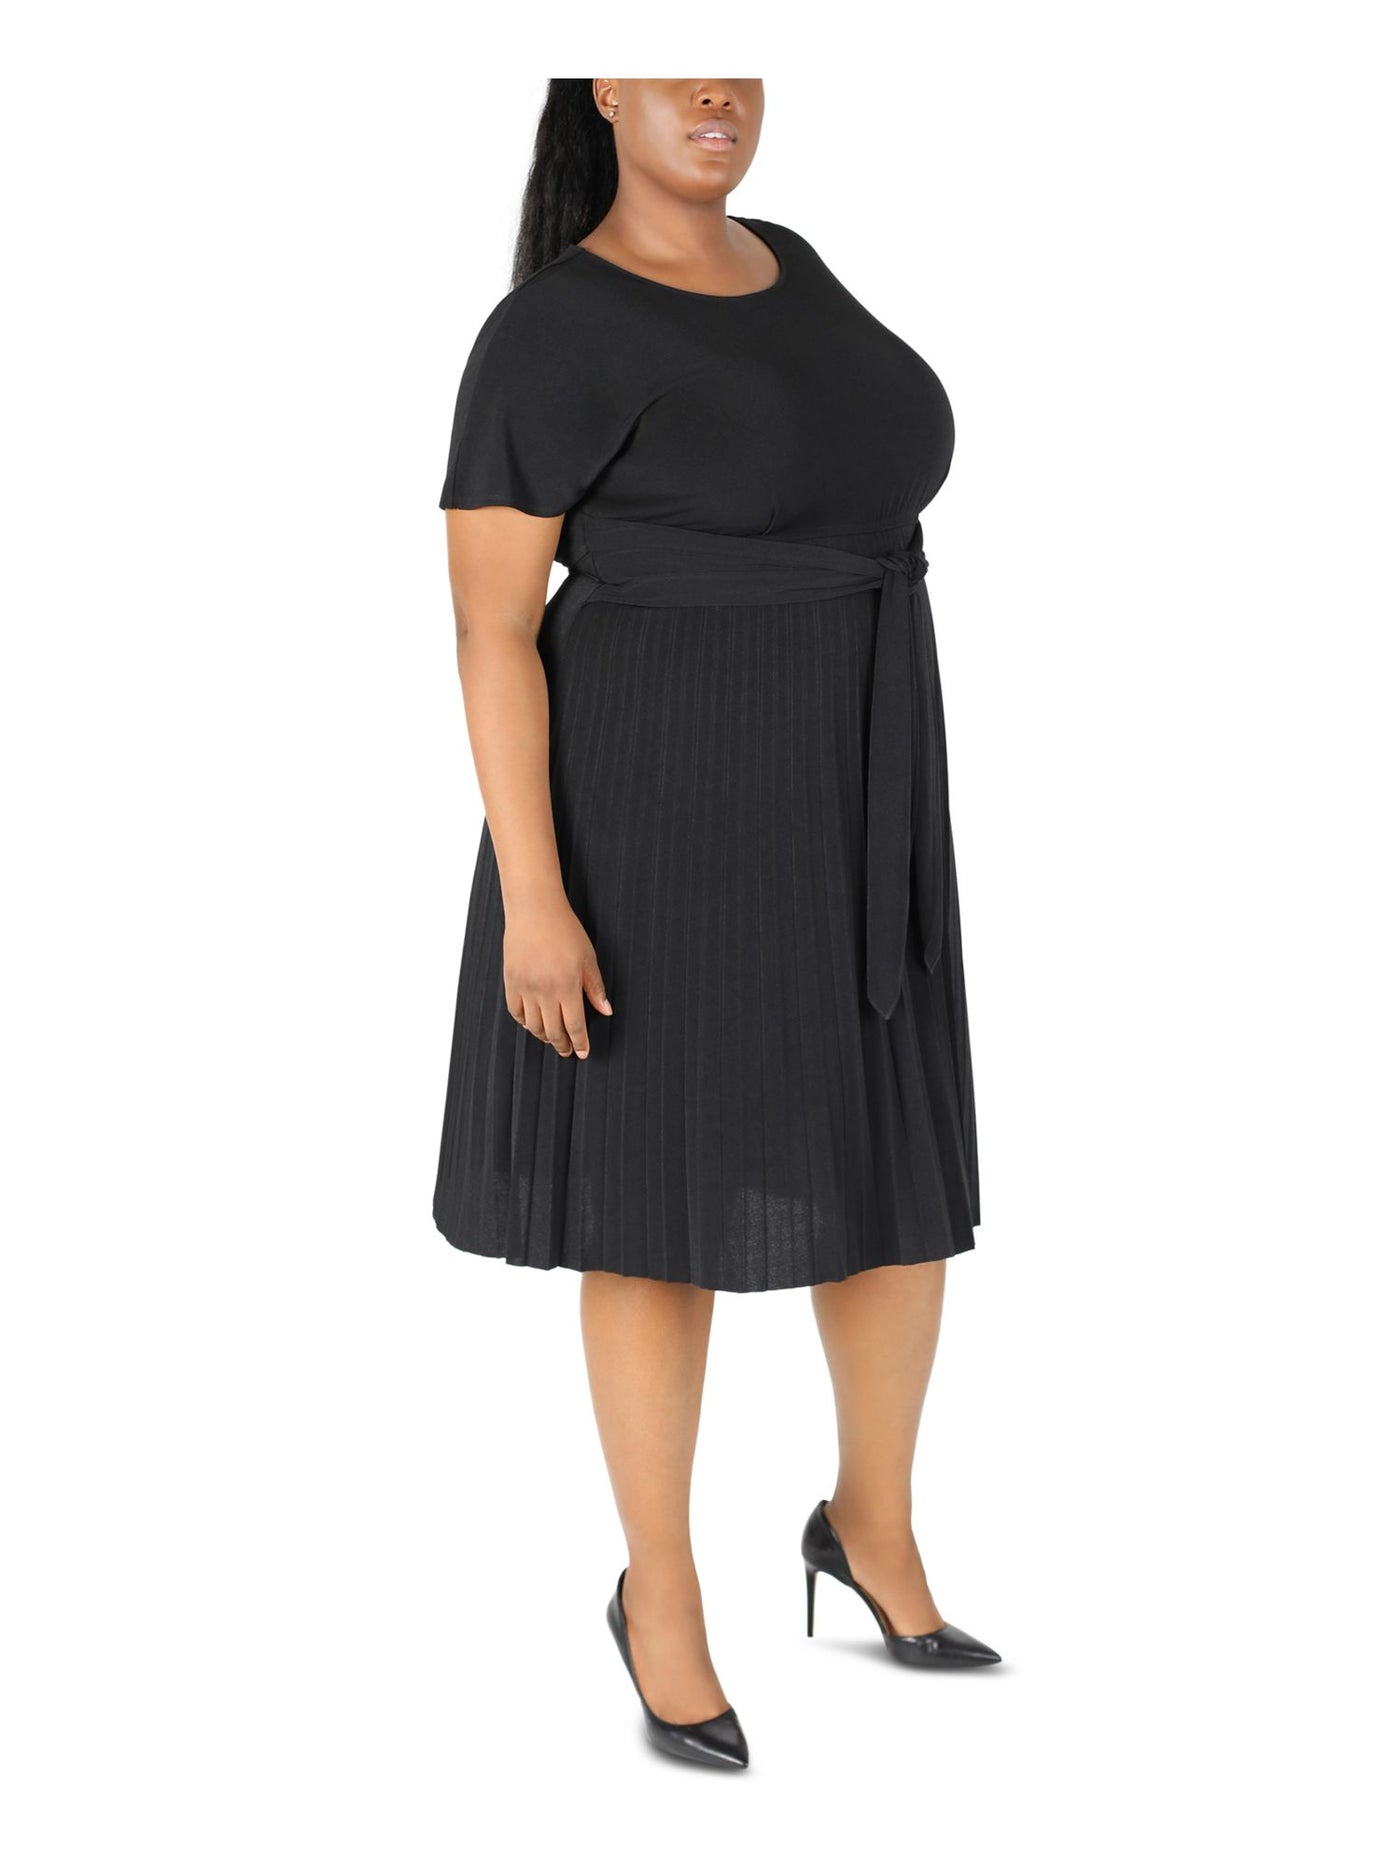 ROBBIE BEE Womens Black Jersey Pleated Tie Pullover Style Unlined Short Sleeve Round Neck Below The Knee Fit + Flare Dress Plus 1X